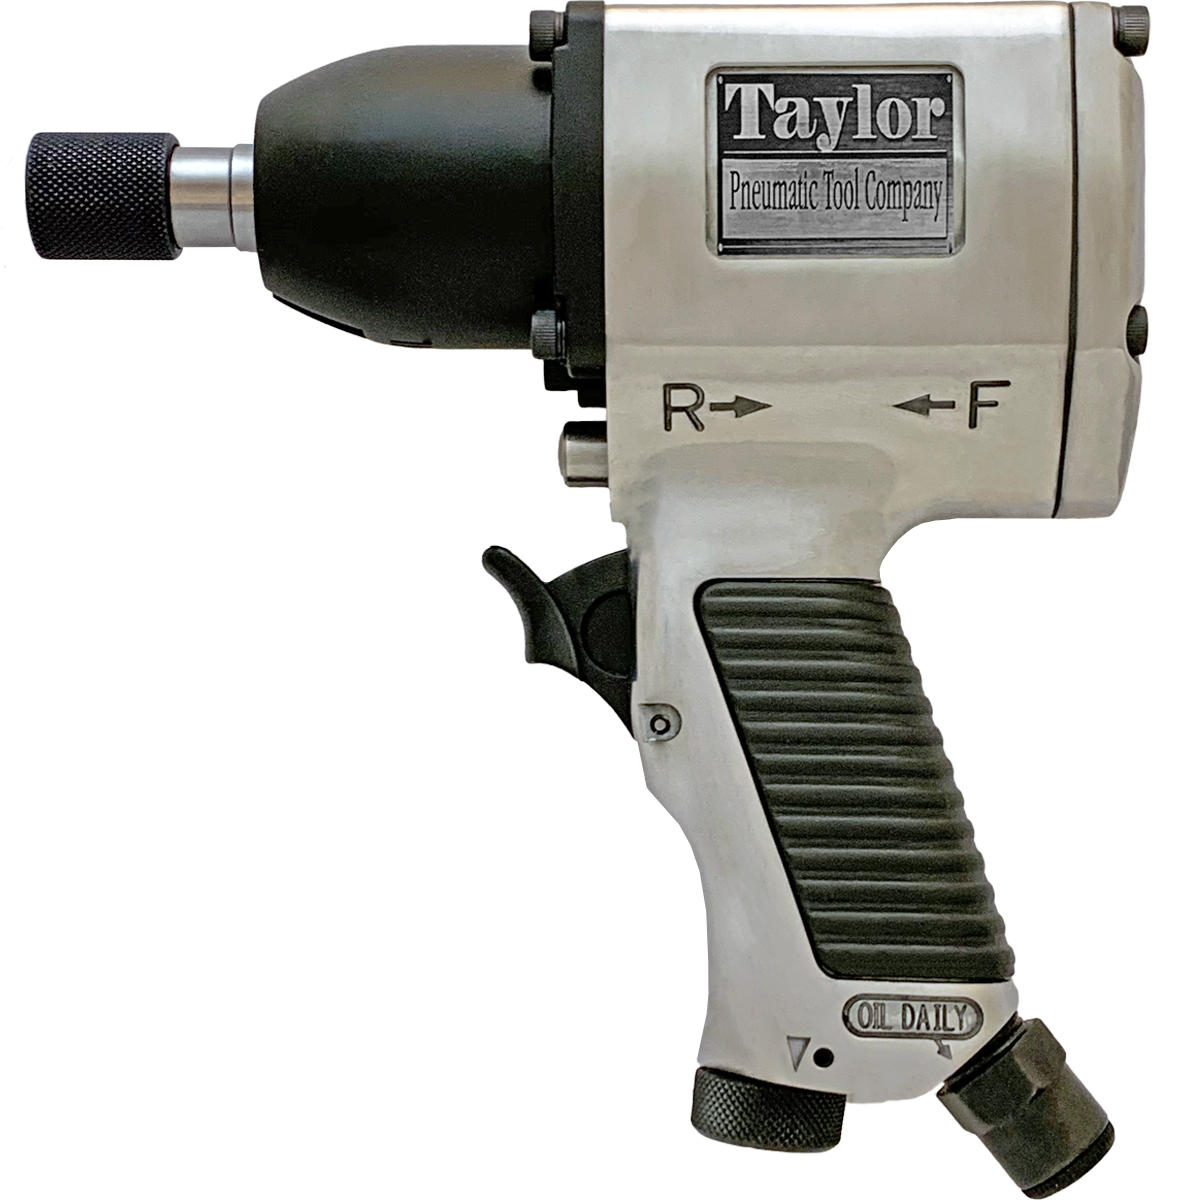 T-7356 HD Needle Scaler – Taylor Pneumatic Tool Company